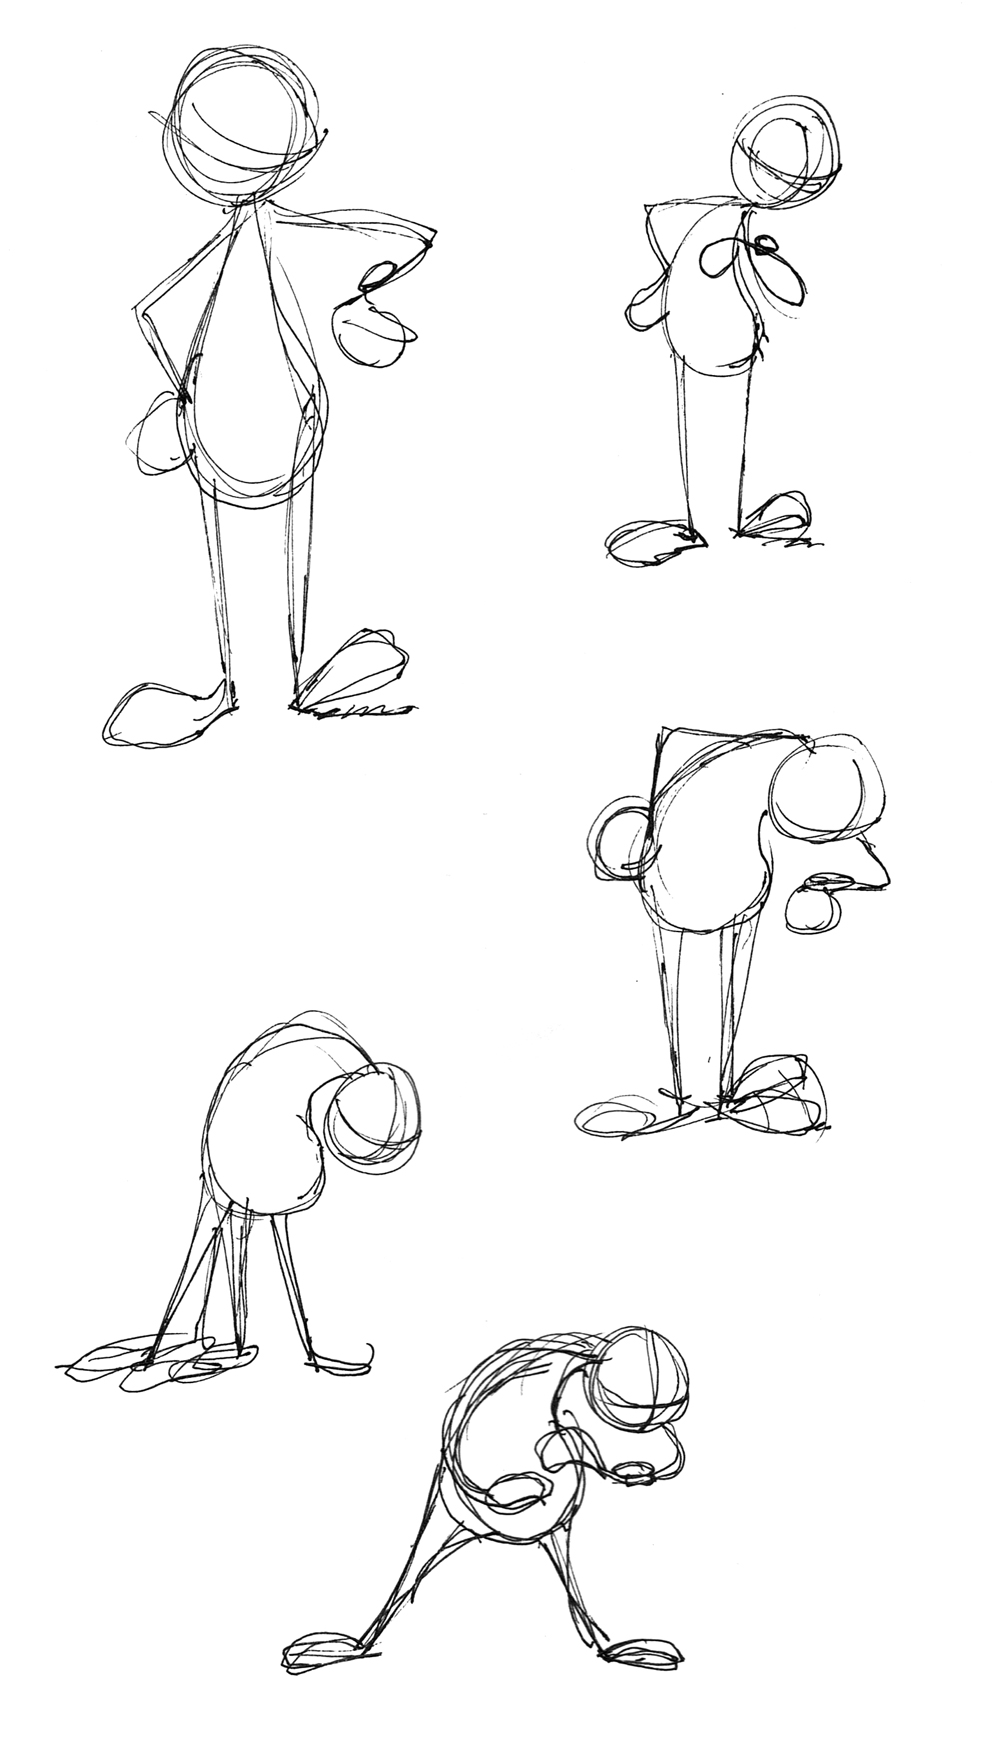 Character Poses Meme Gt Edition! by Friendlyfoxpal on DeviantArt